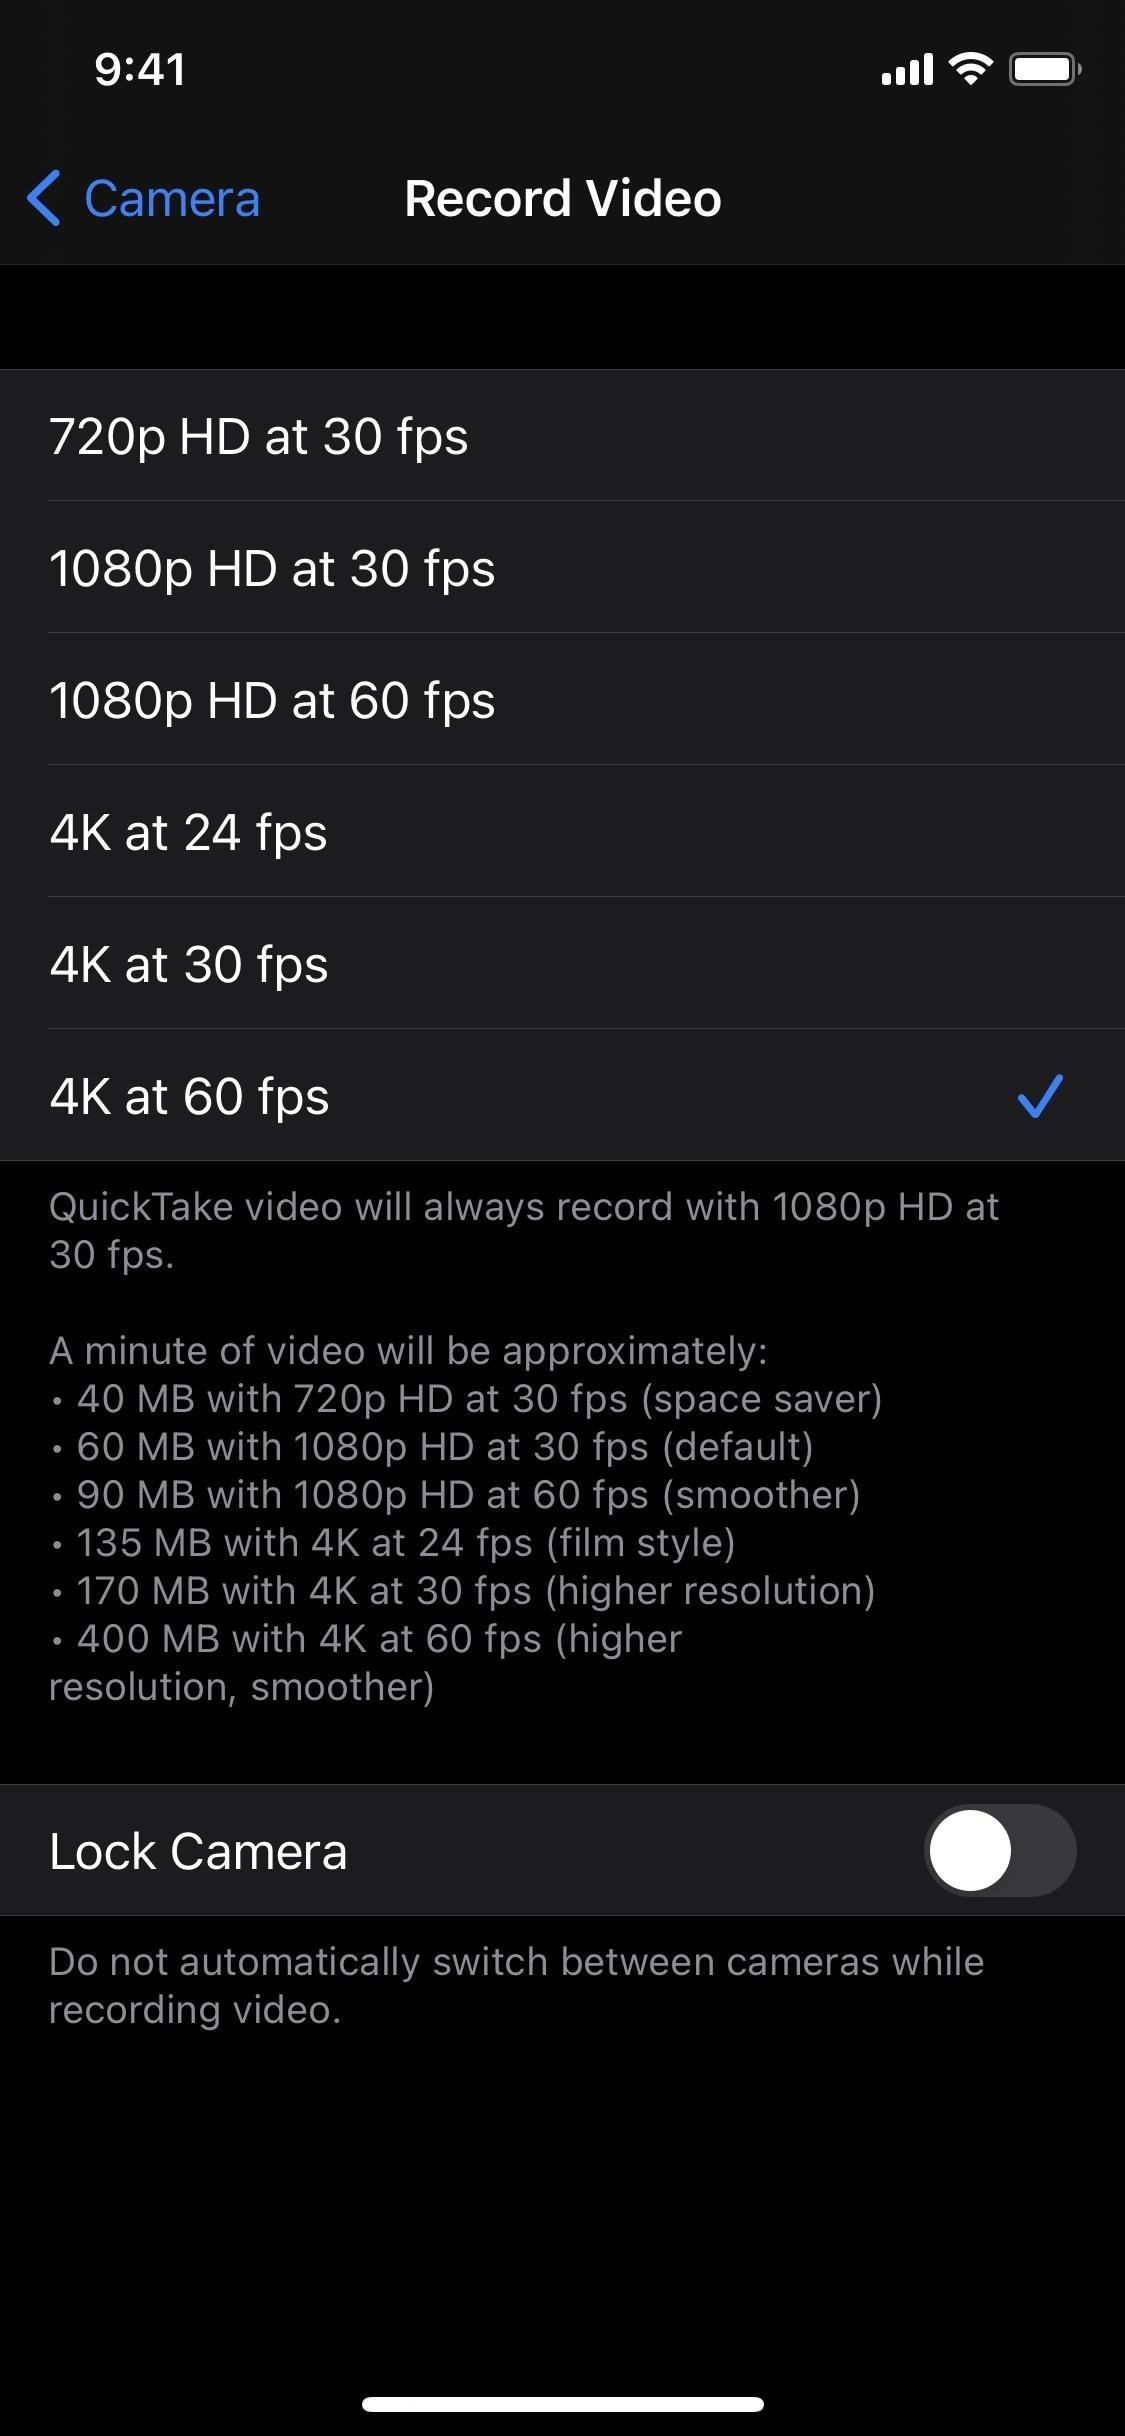 You Can Shoot Better-Looking Videos on Your iPhone if You Change This One Setting